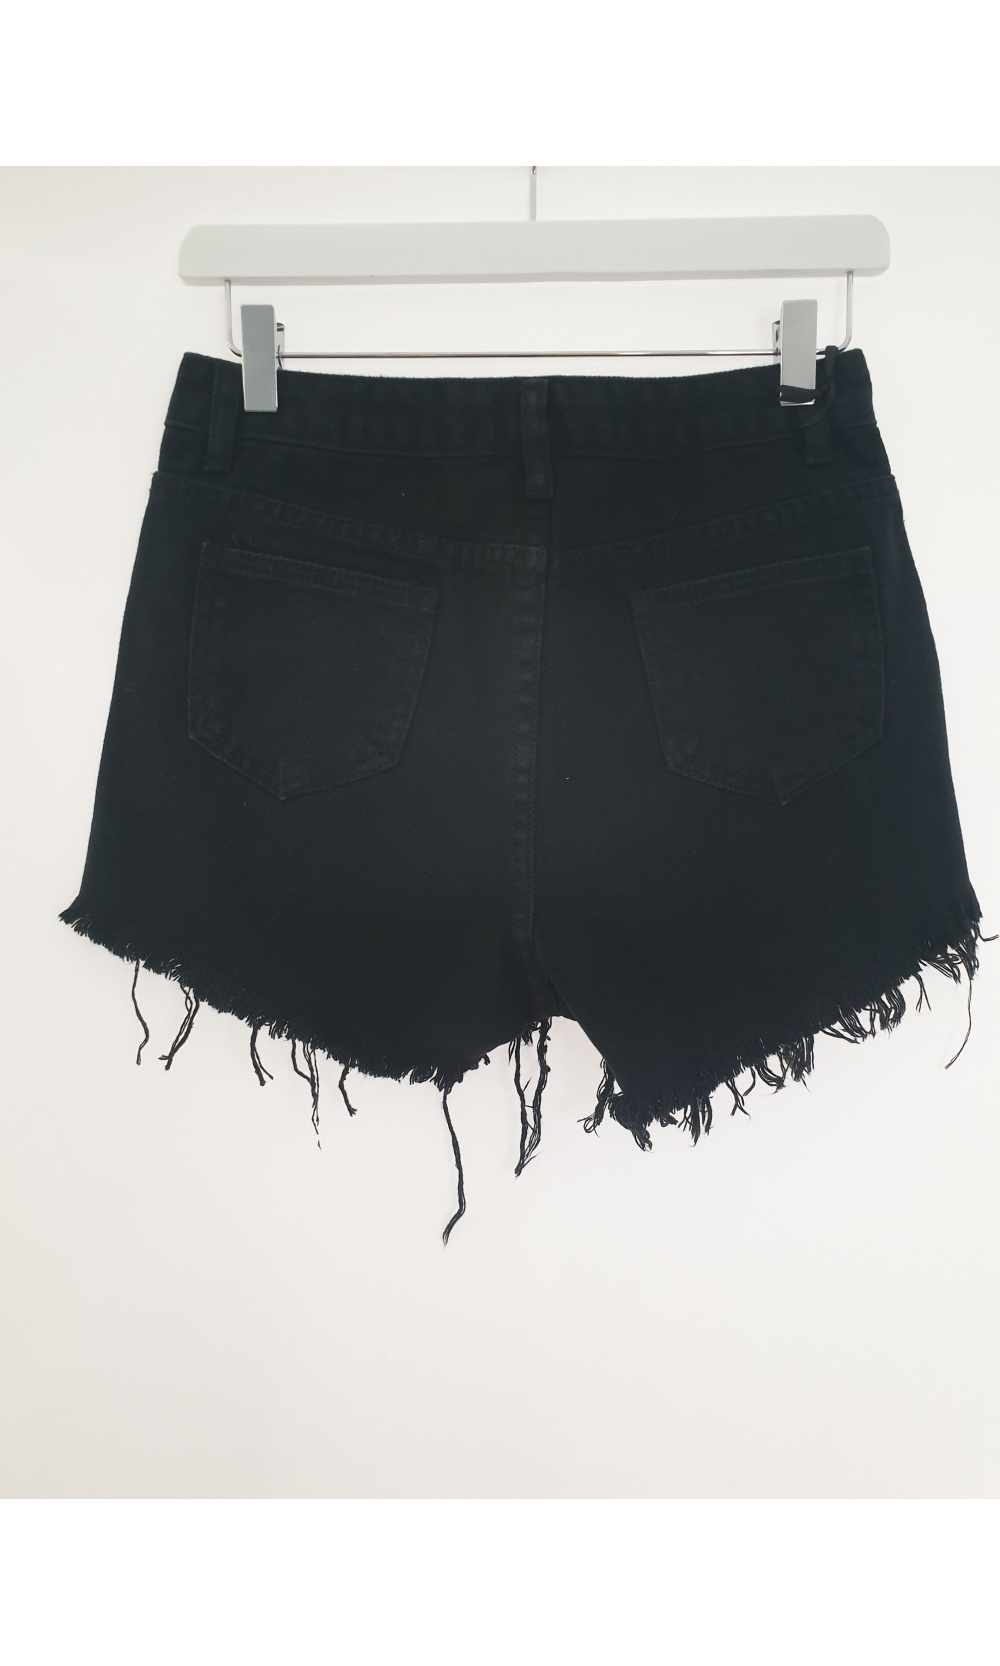 Black pair of shorts in jeans